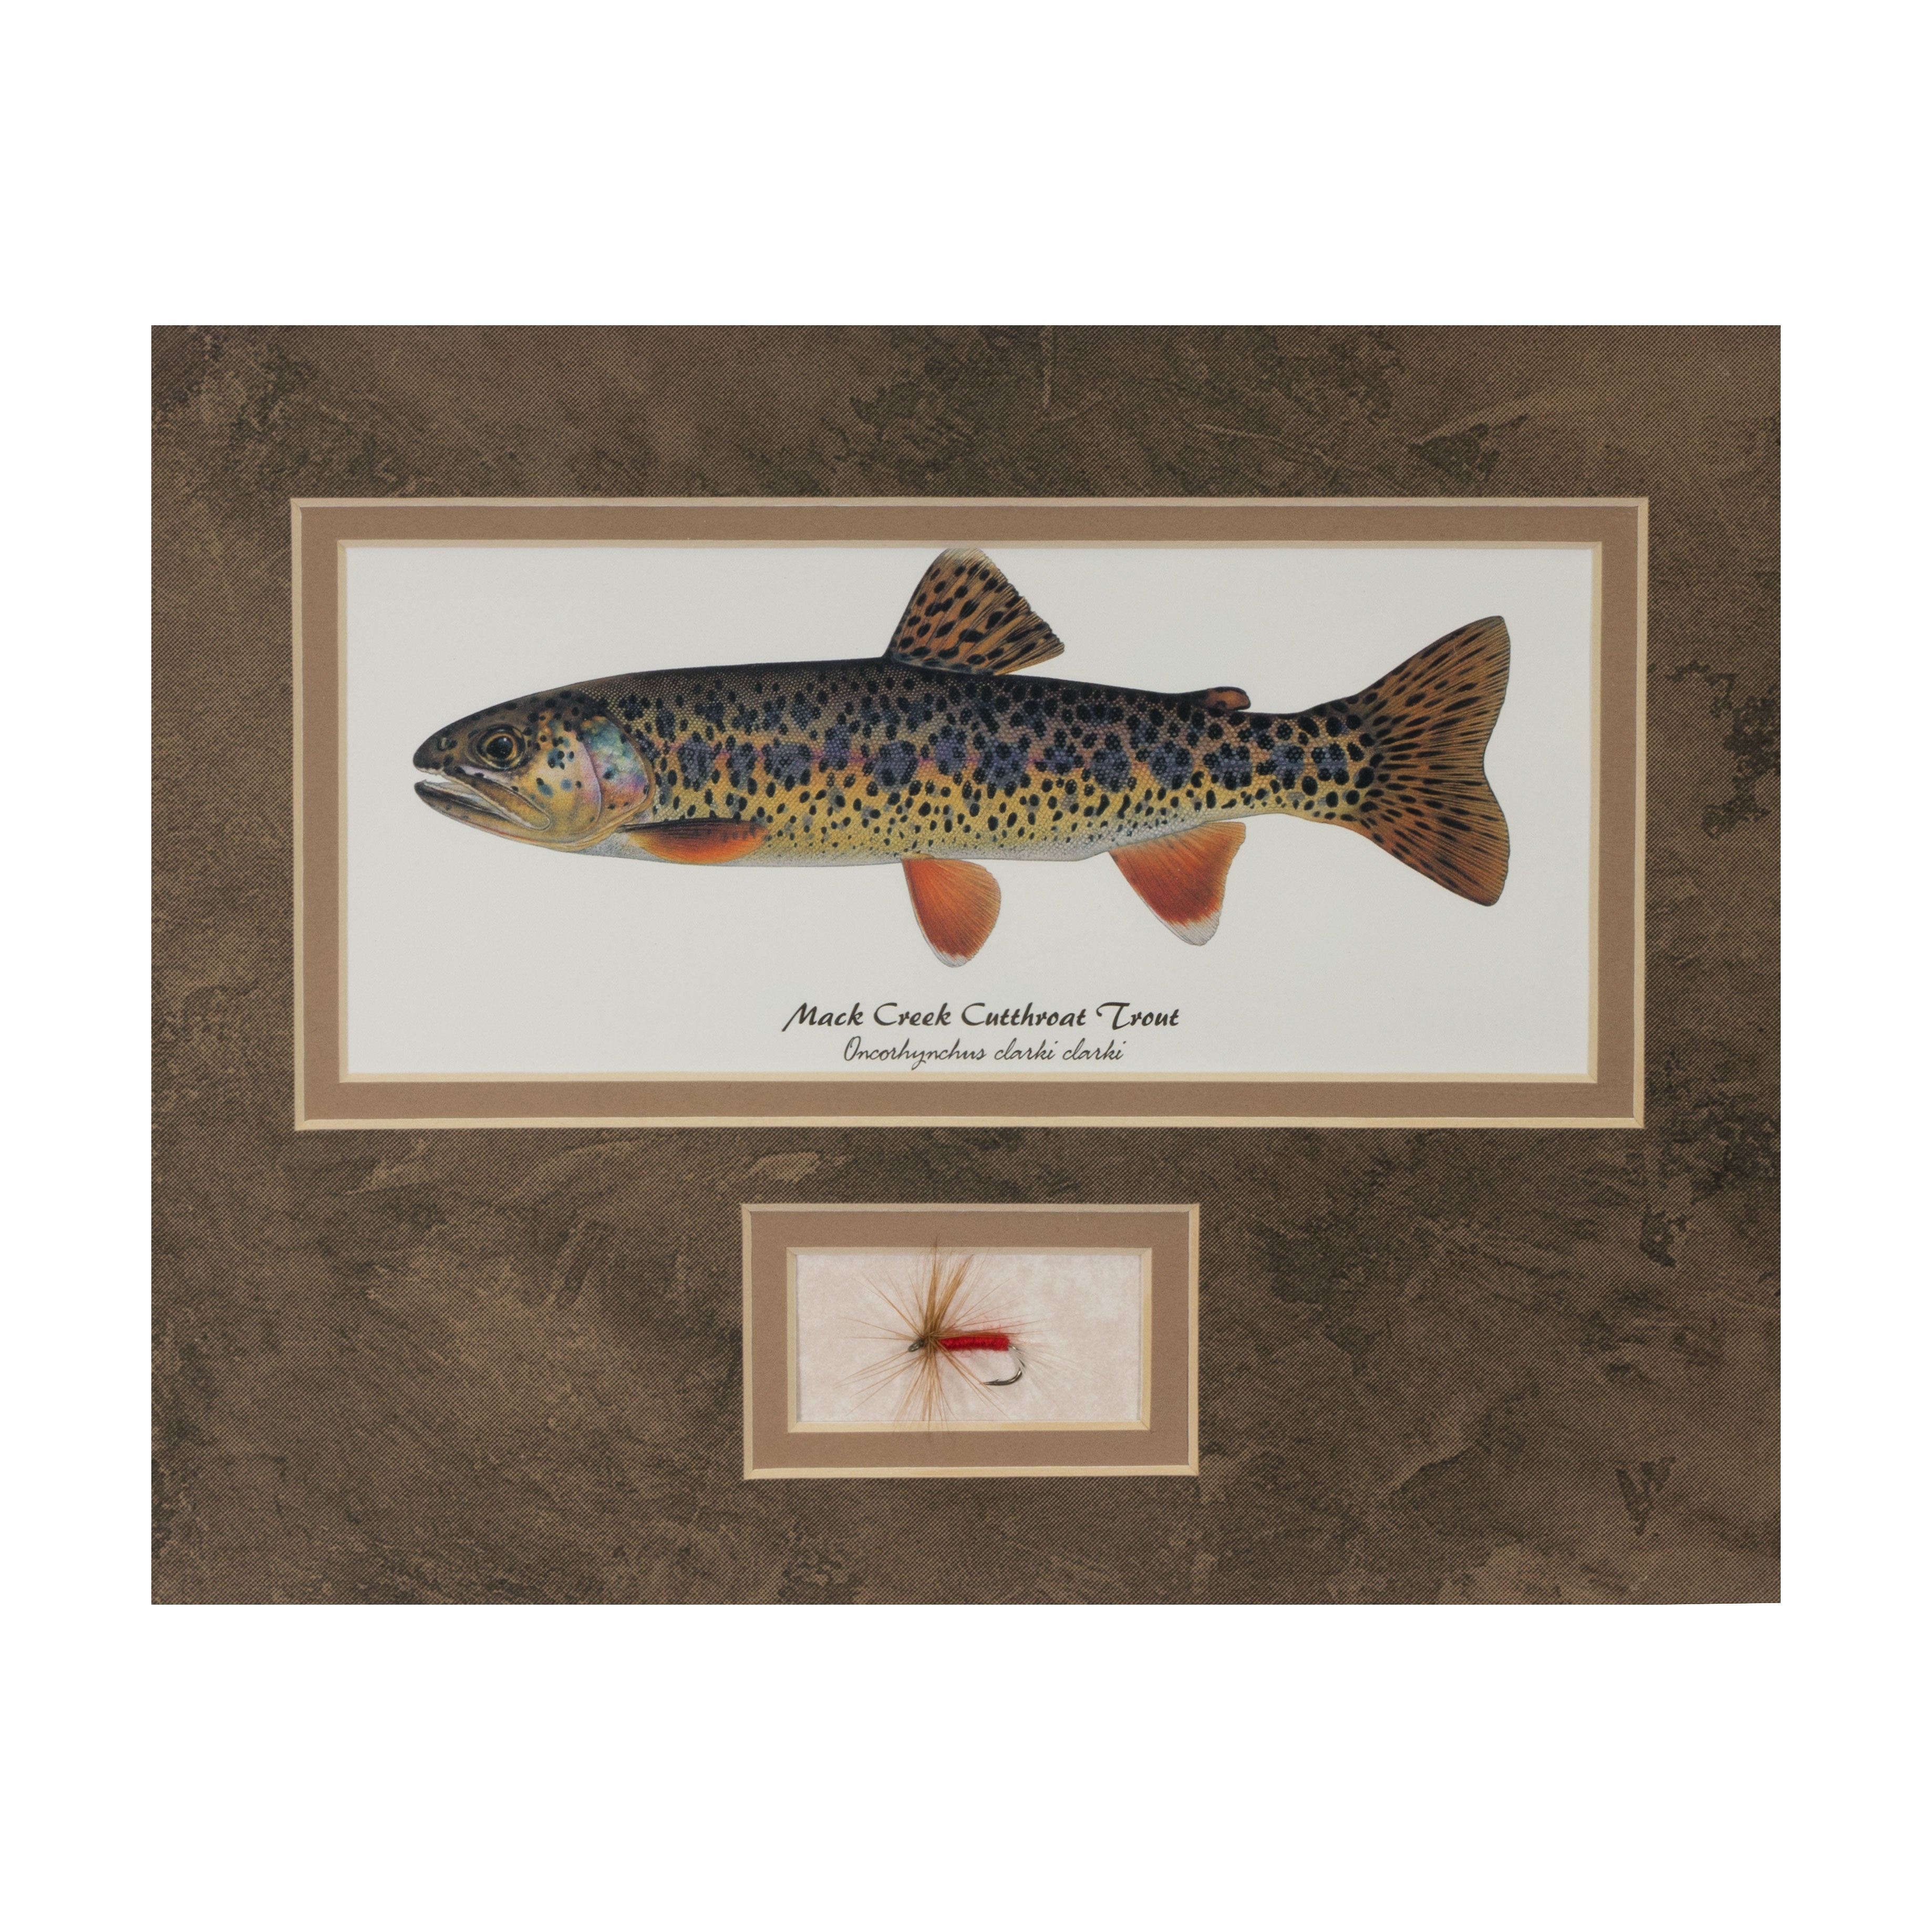 Set of Any 2 Trout Unframed Rainbow, Brook, Brown or Cutthroat